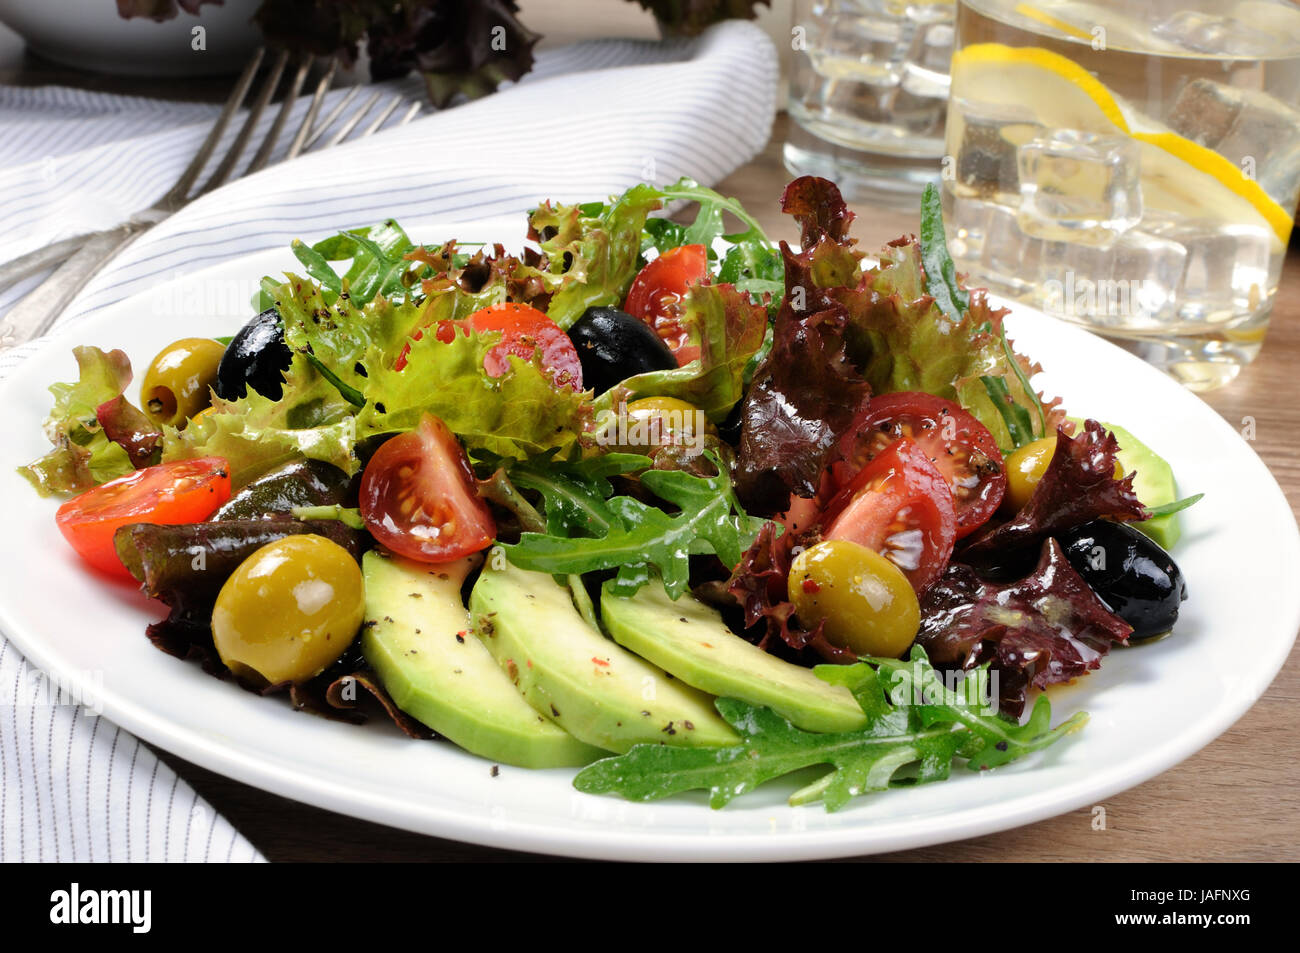 Summer salad - with avocado, olives, tomatoes in lettuce dressed, mustard-garlic sauce Stock Photo